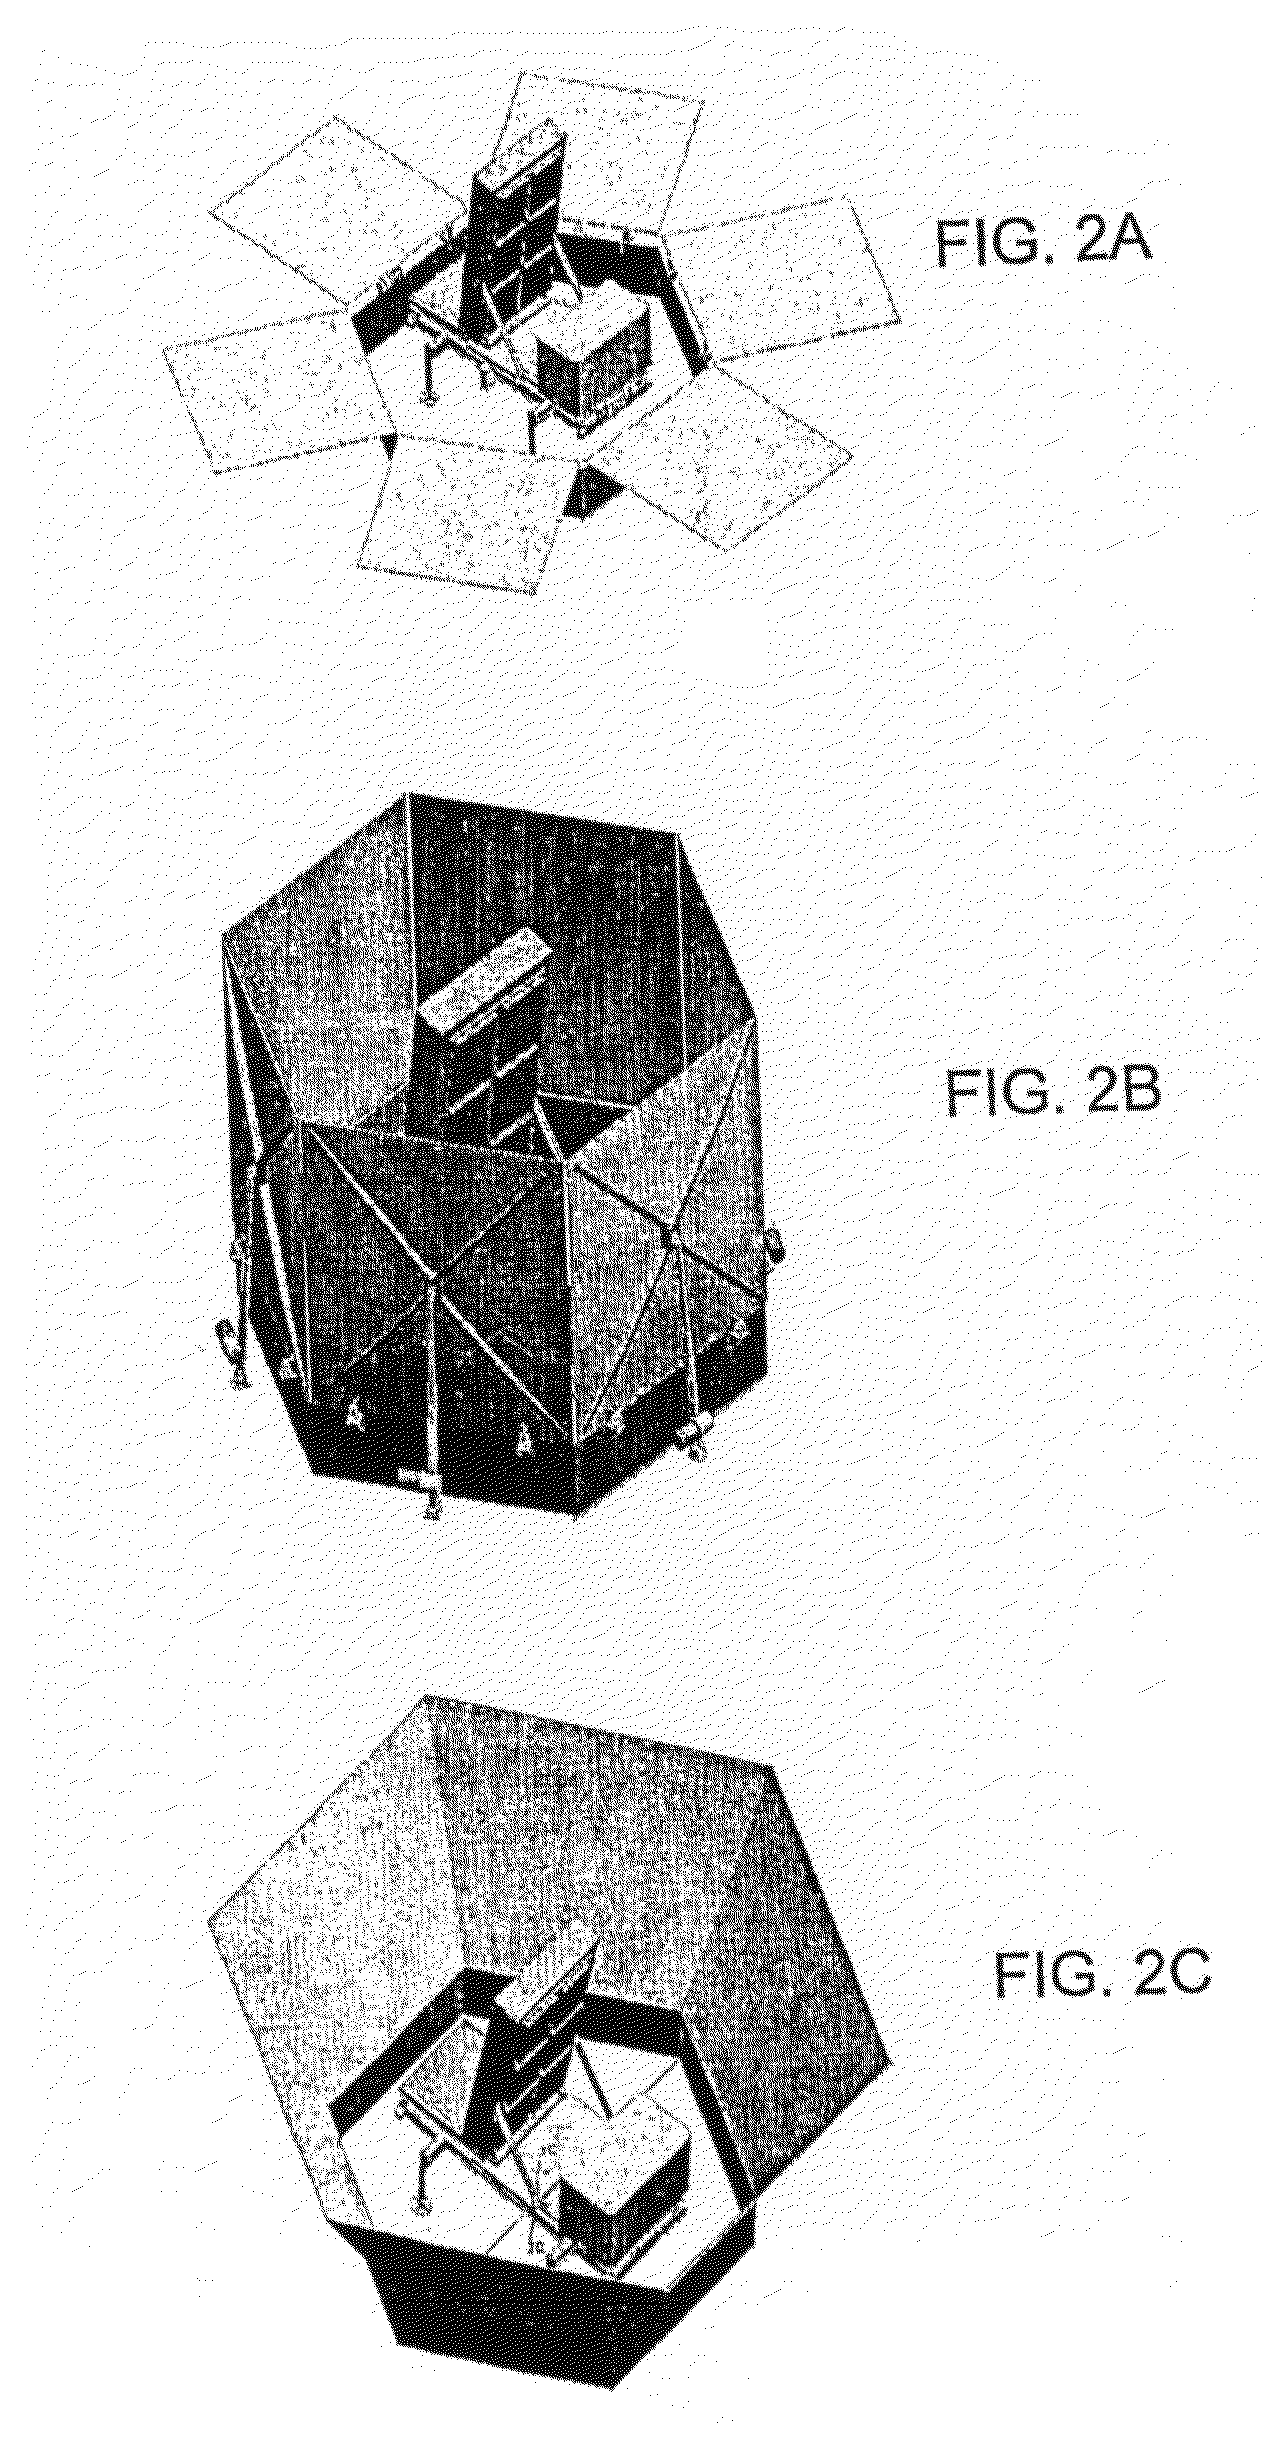 Method and System for Deployed Shielding Against Ballistic Threats